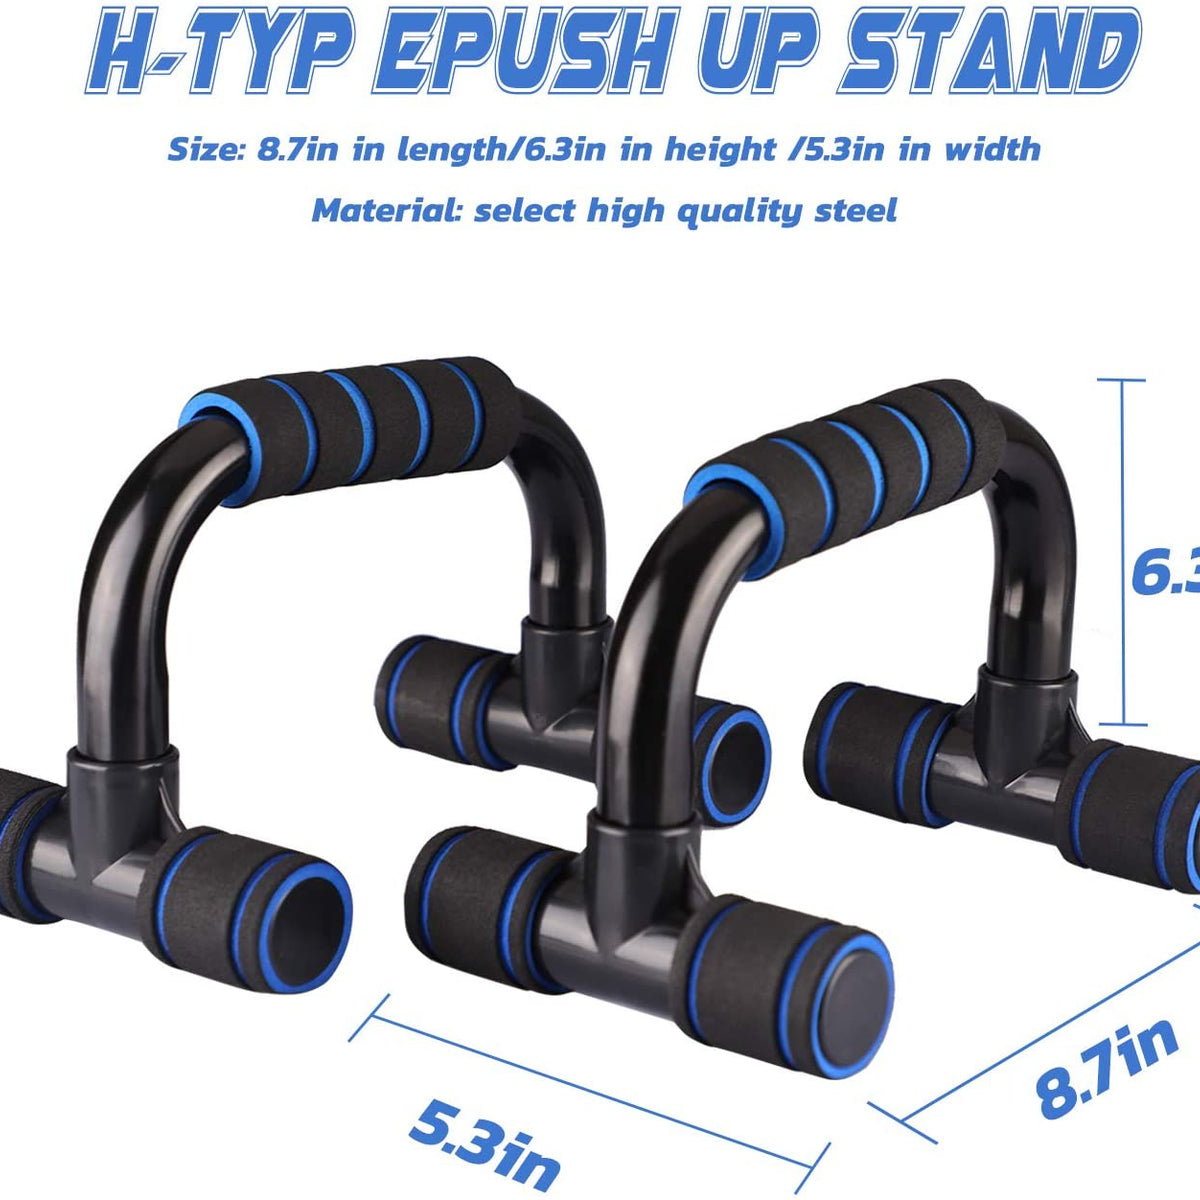 Heavy Duty Pushup Stands